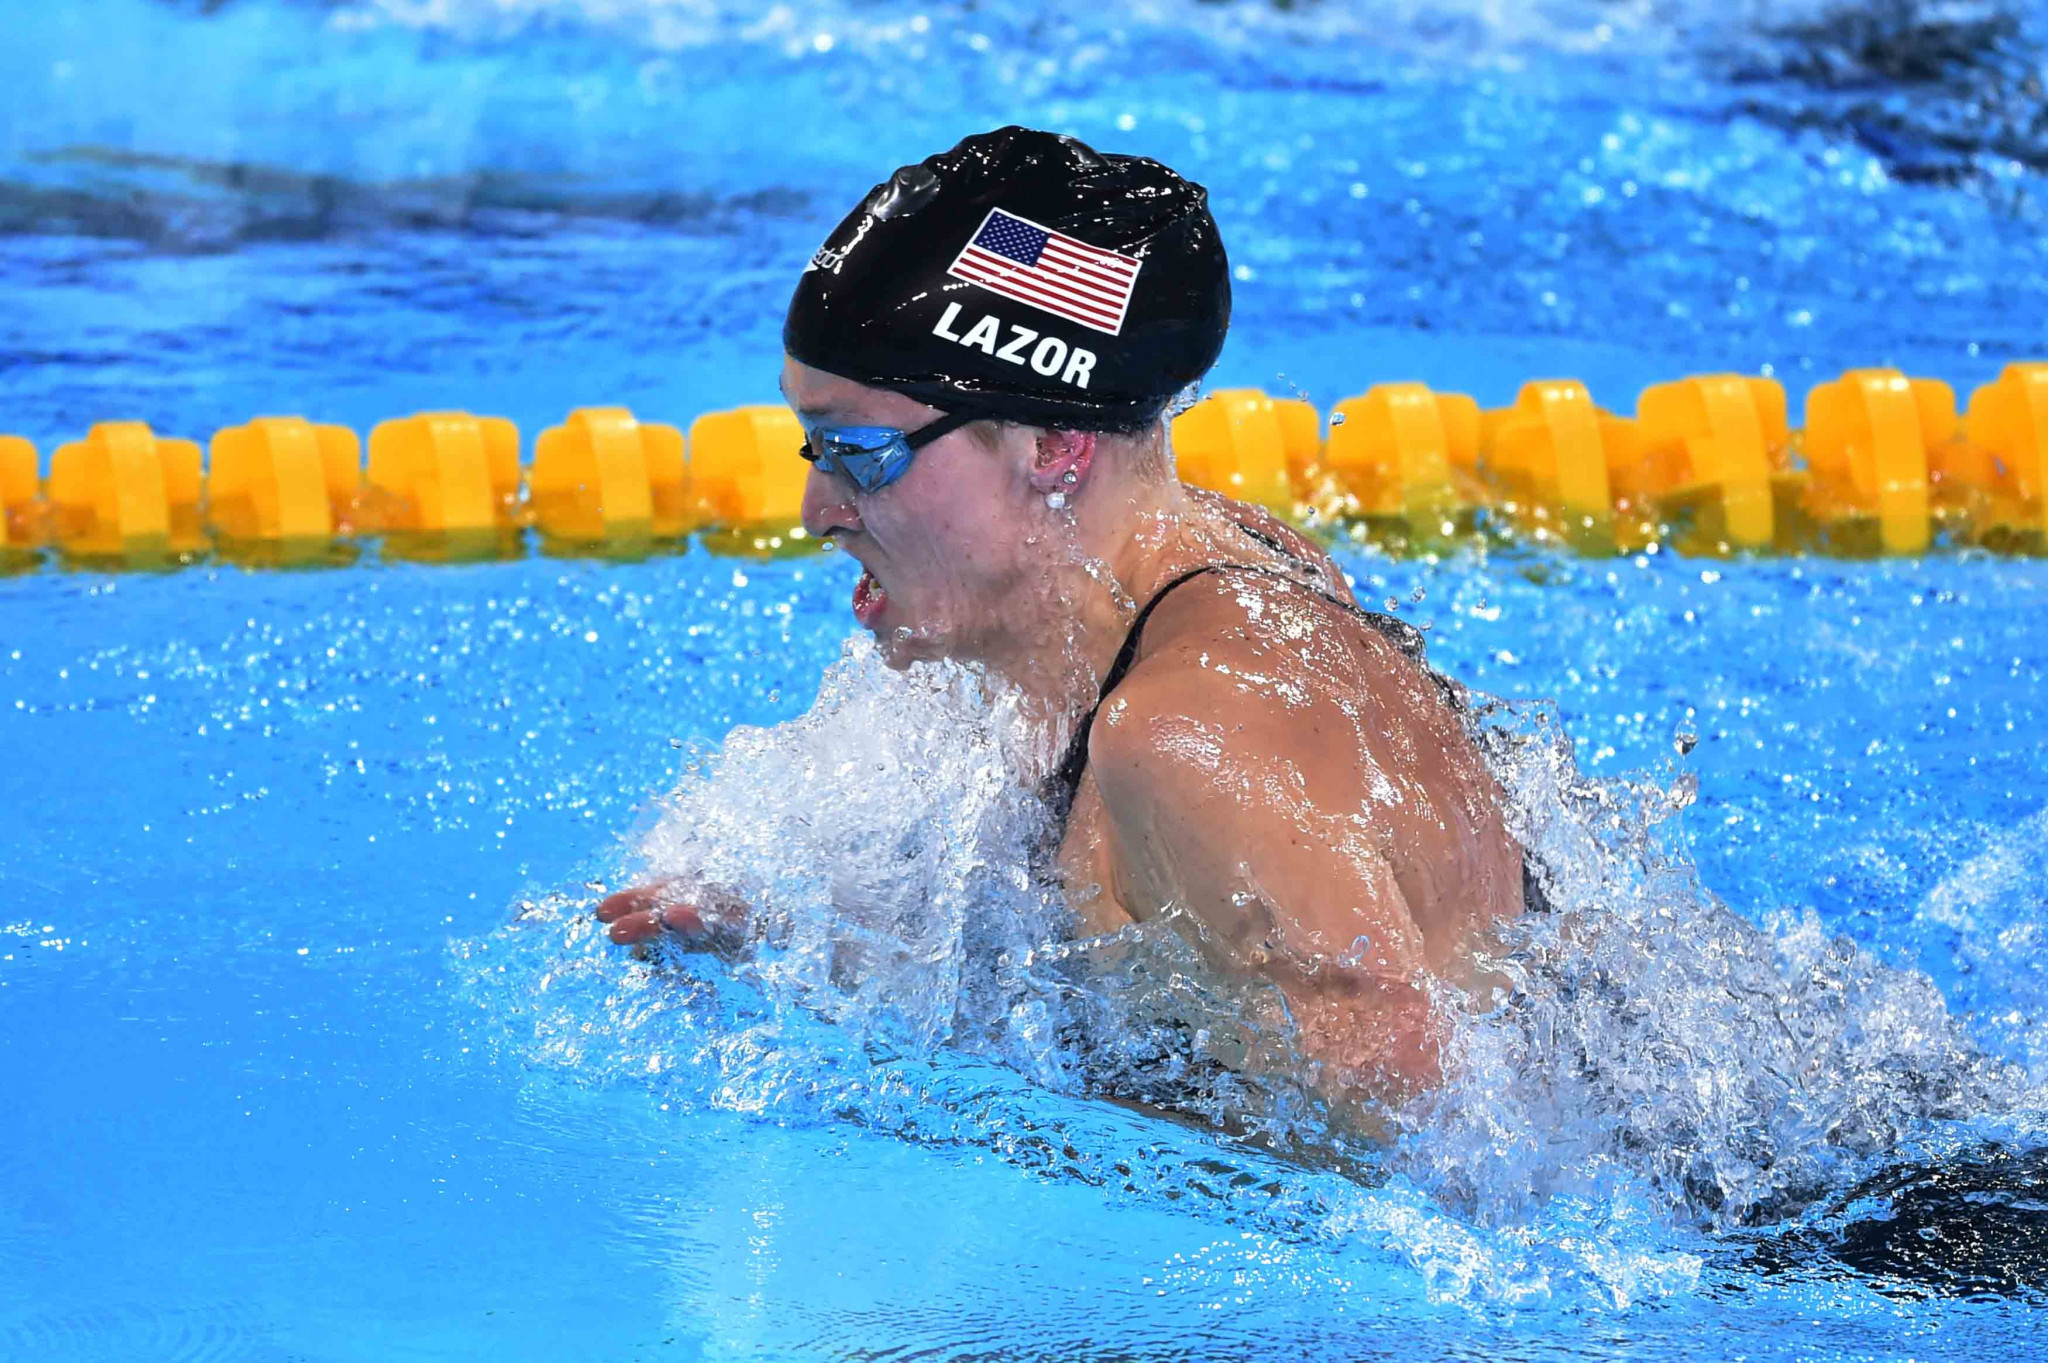 Anne Lazor of the United States triumphed in the women's 100m breaststroke ©Lima 2019